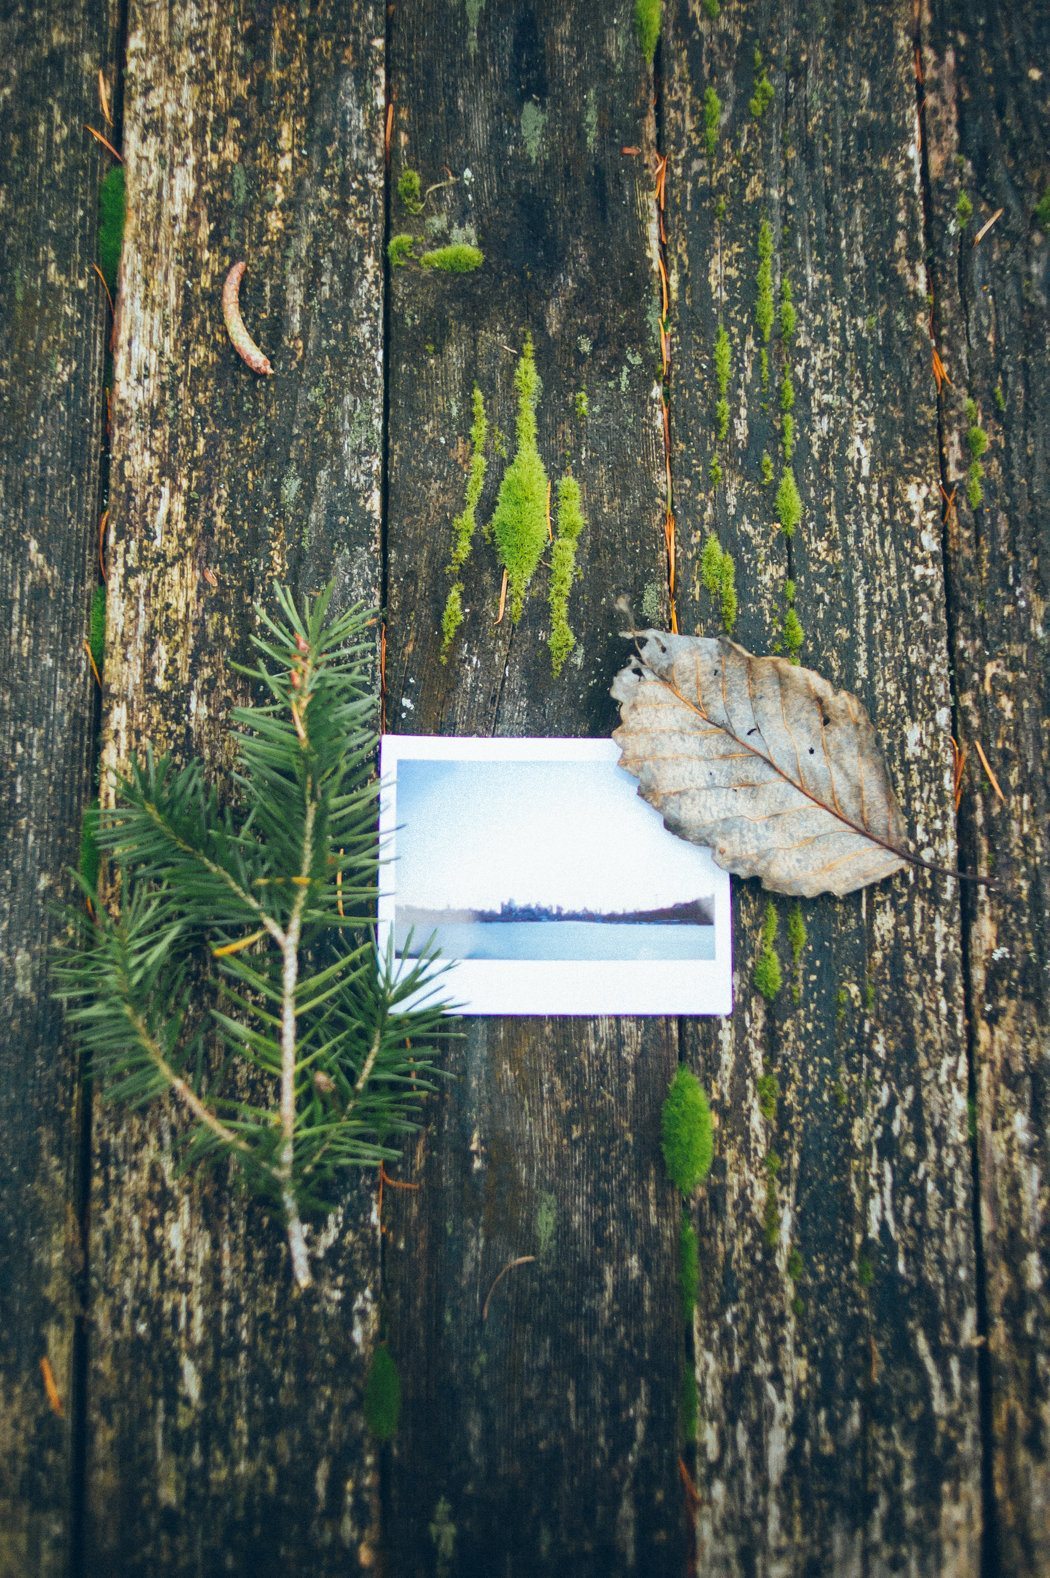 View More: http://morganashleyphotography.pass.us/travel-posts